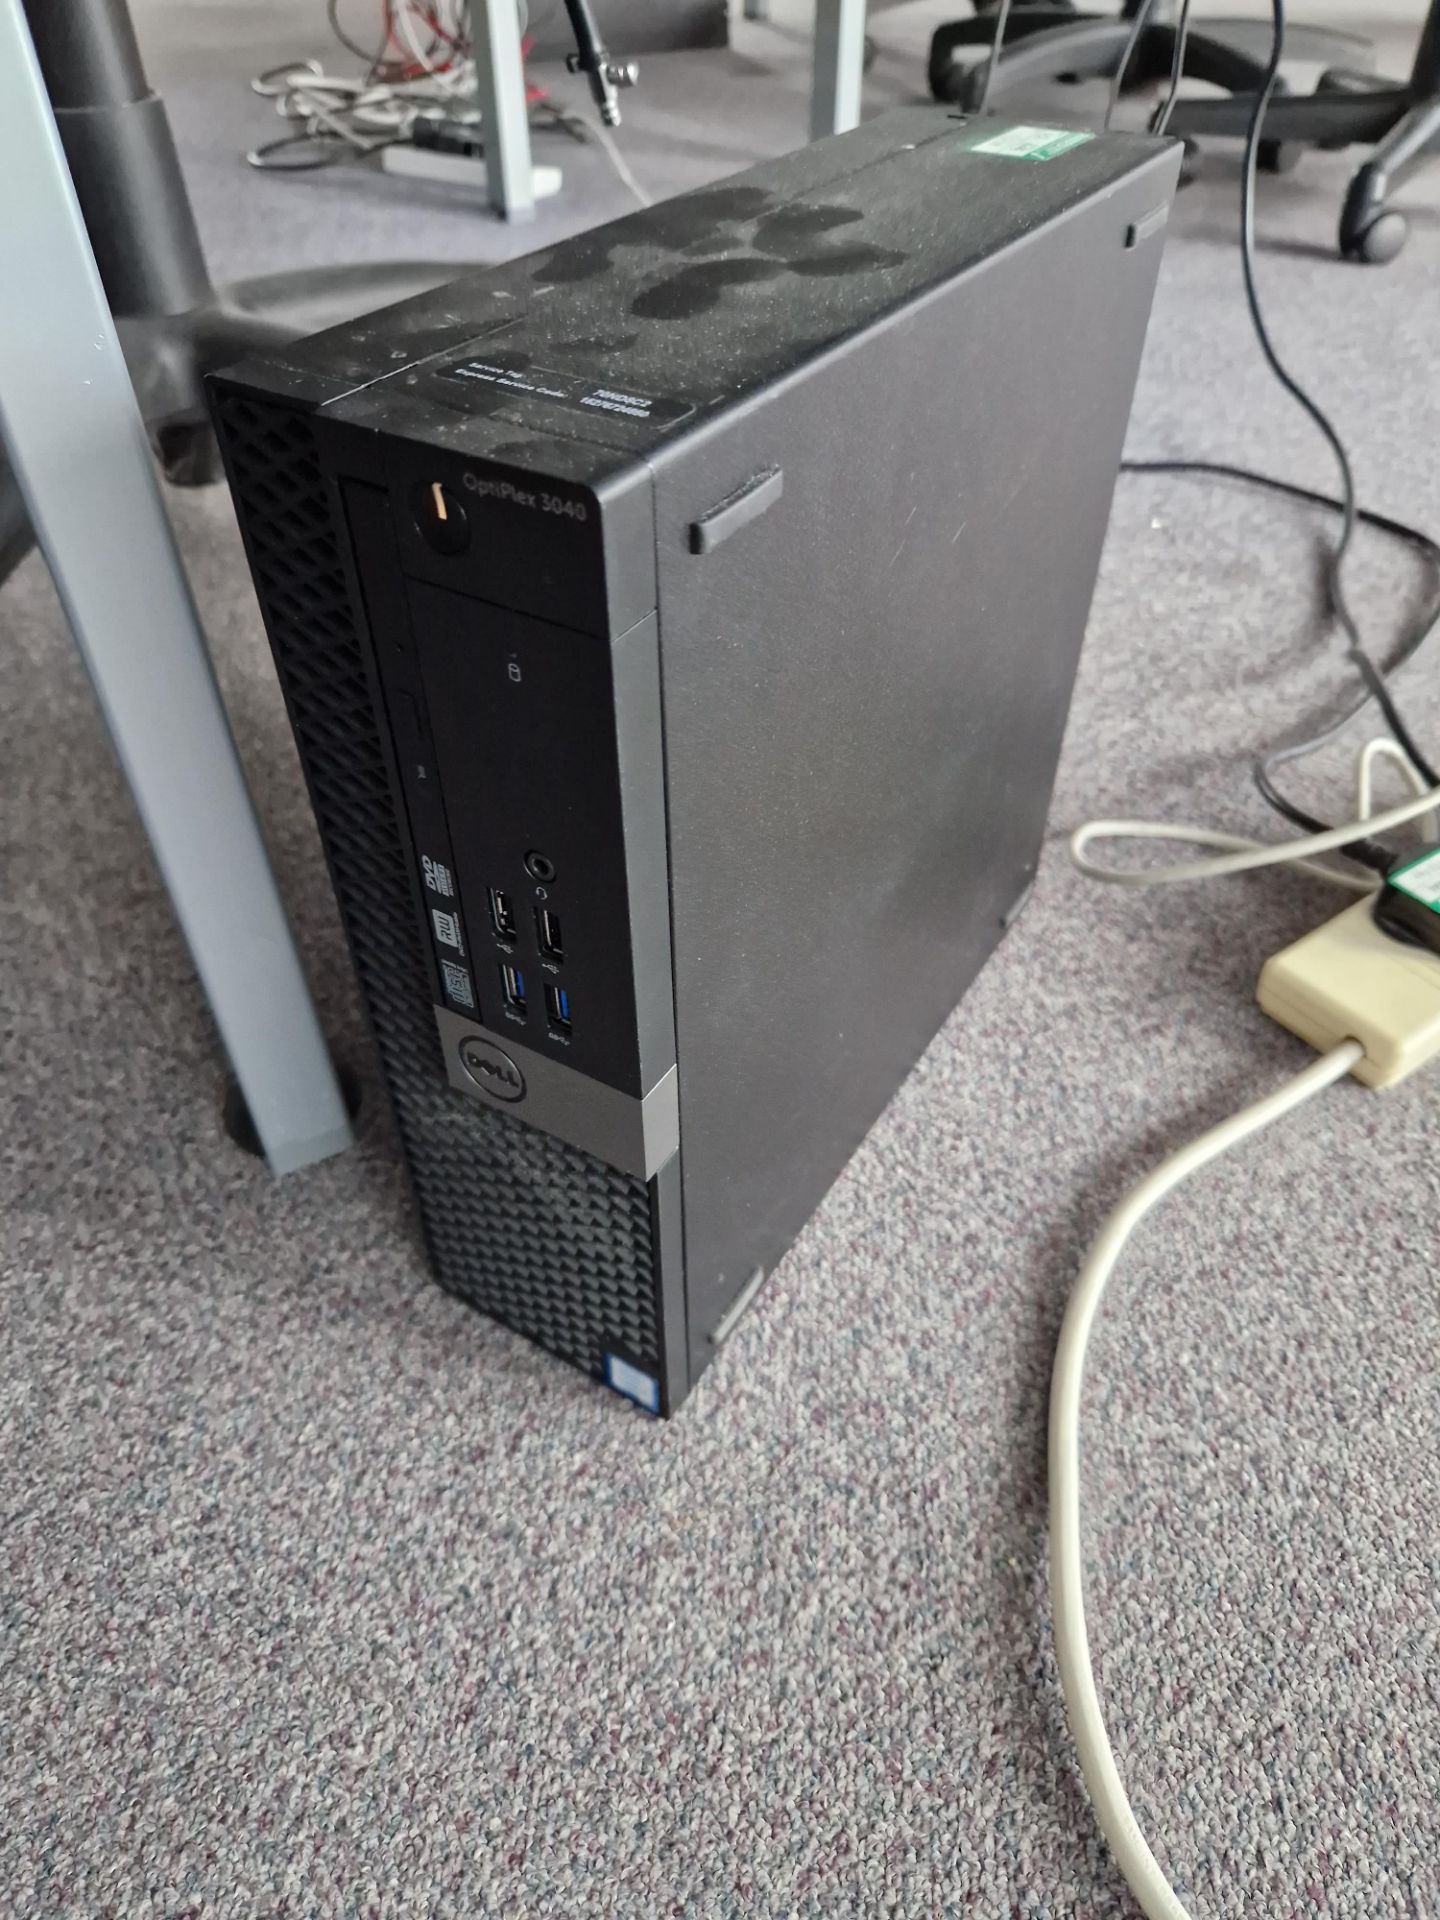 Dell OptiPlex 3040 Core i5 Desktop PC, Monitor, Keyboard and Mouse (Hard Drive Removed) Please - Image 2 of 2